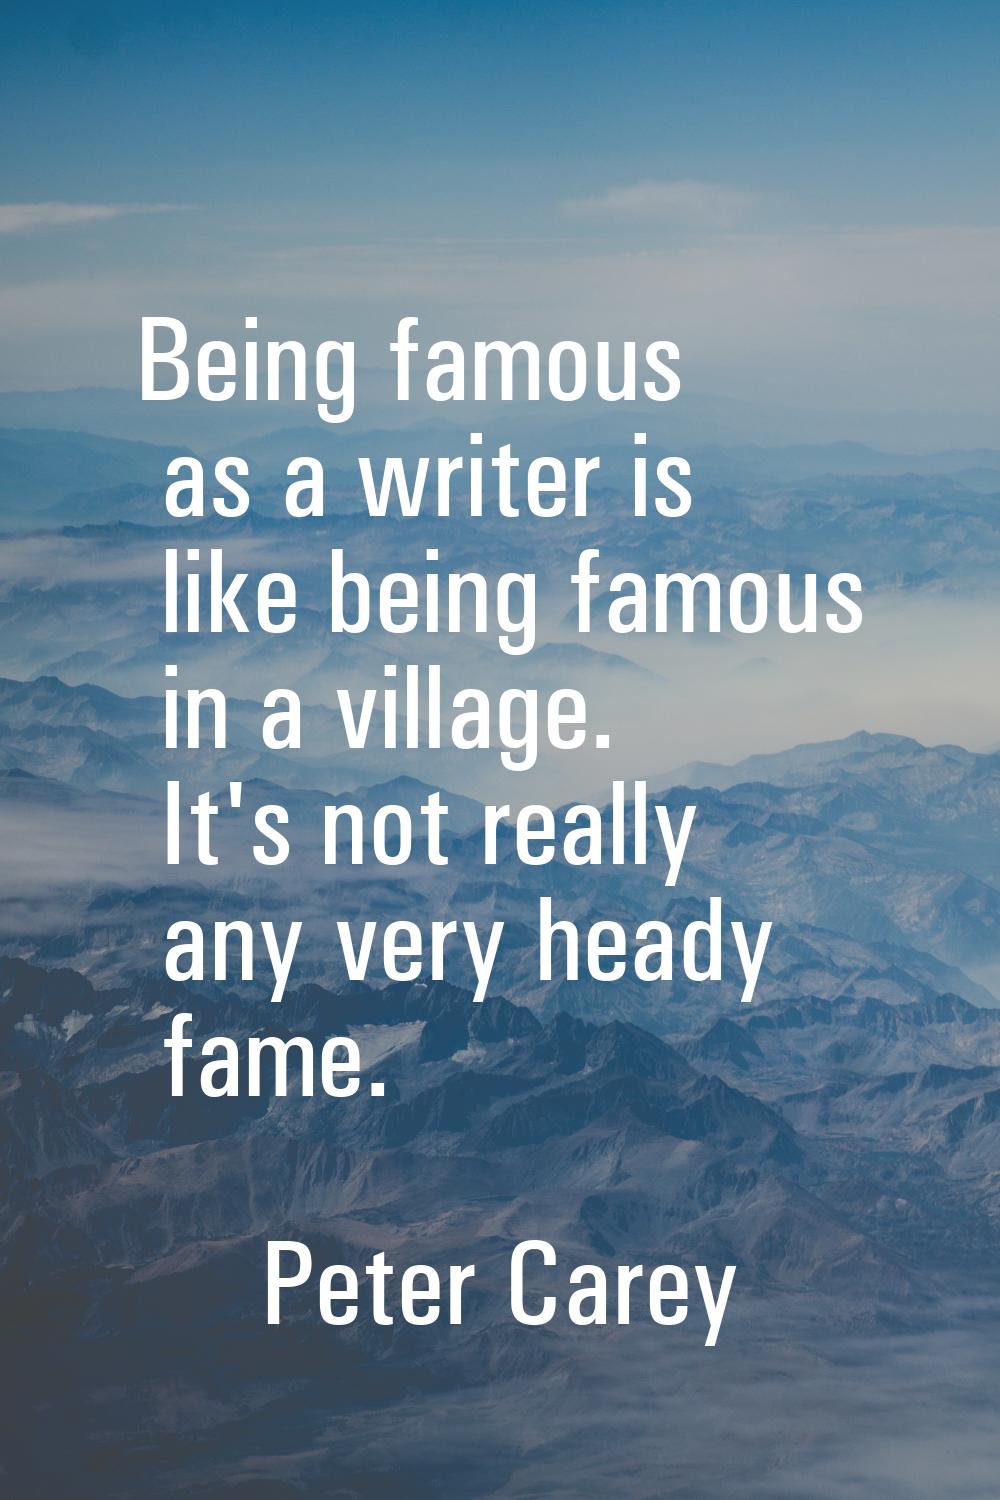 Being famous as a writer is like being famous in a village. It's not really any very heady fame.